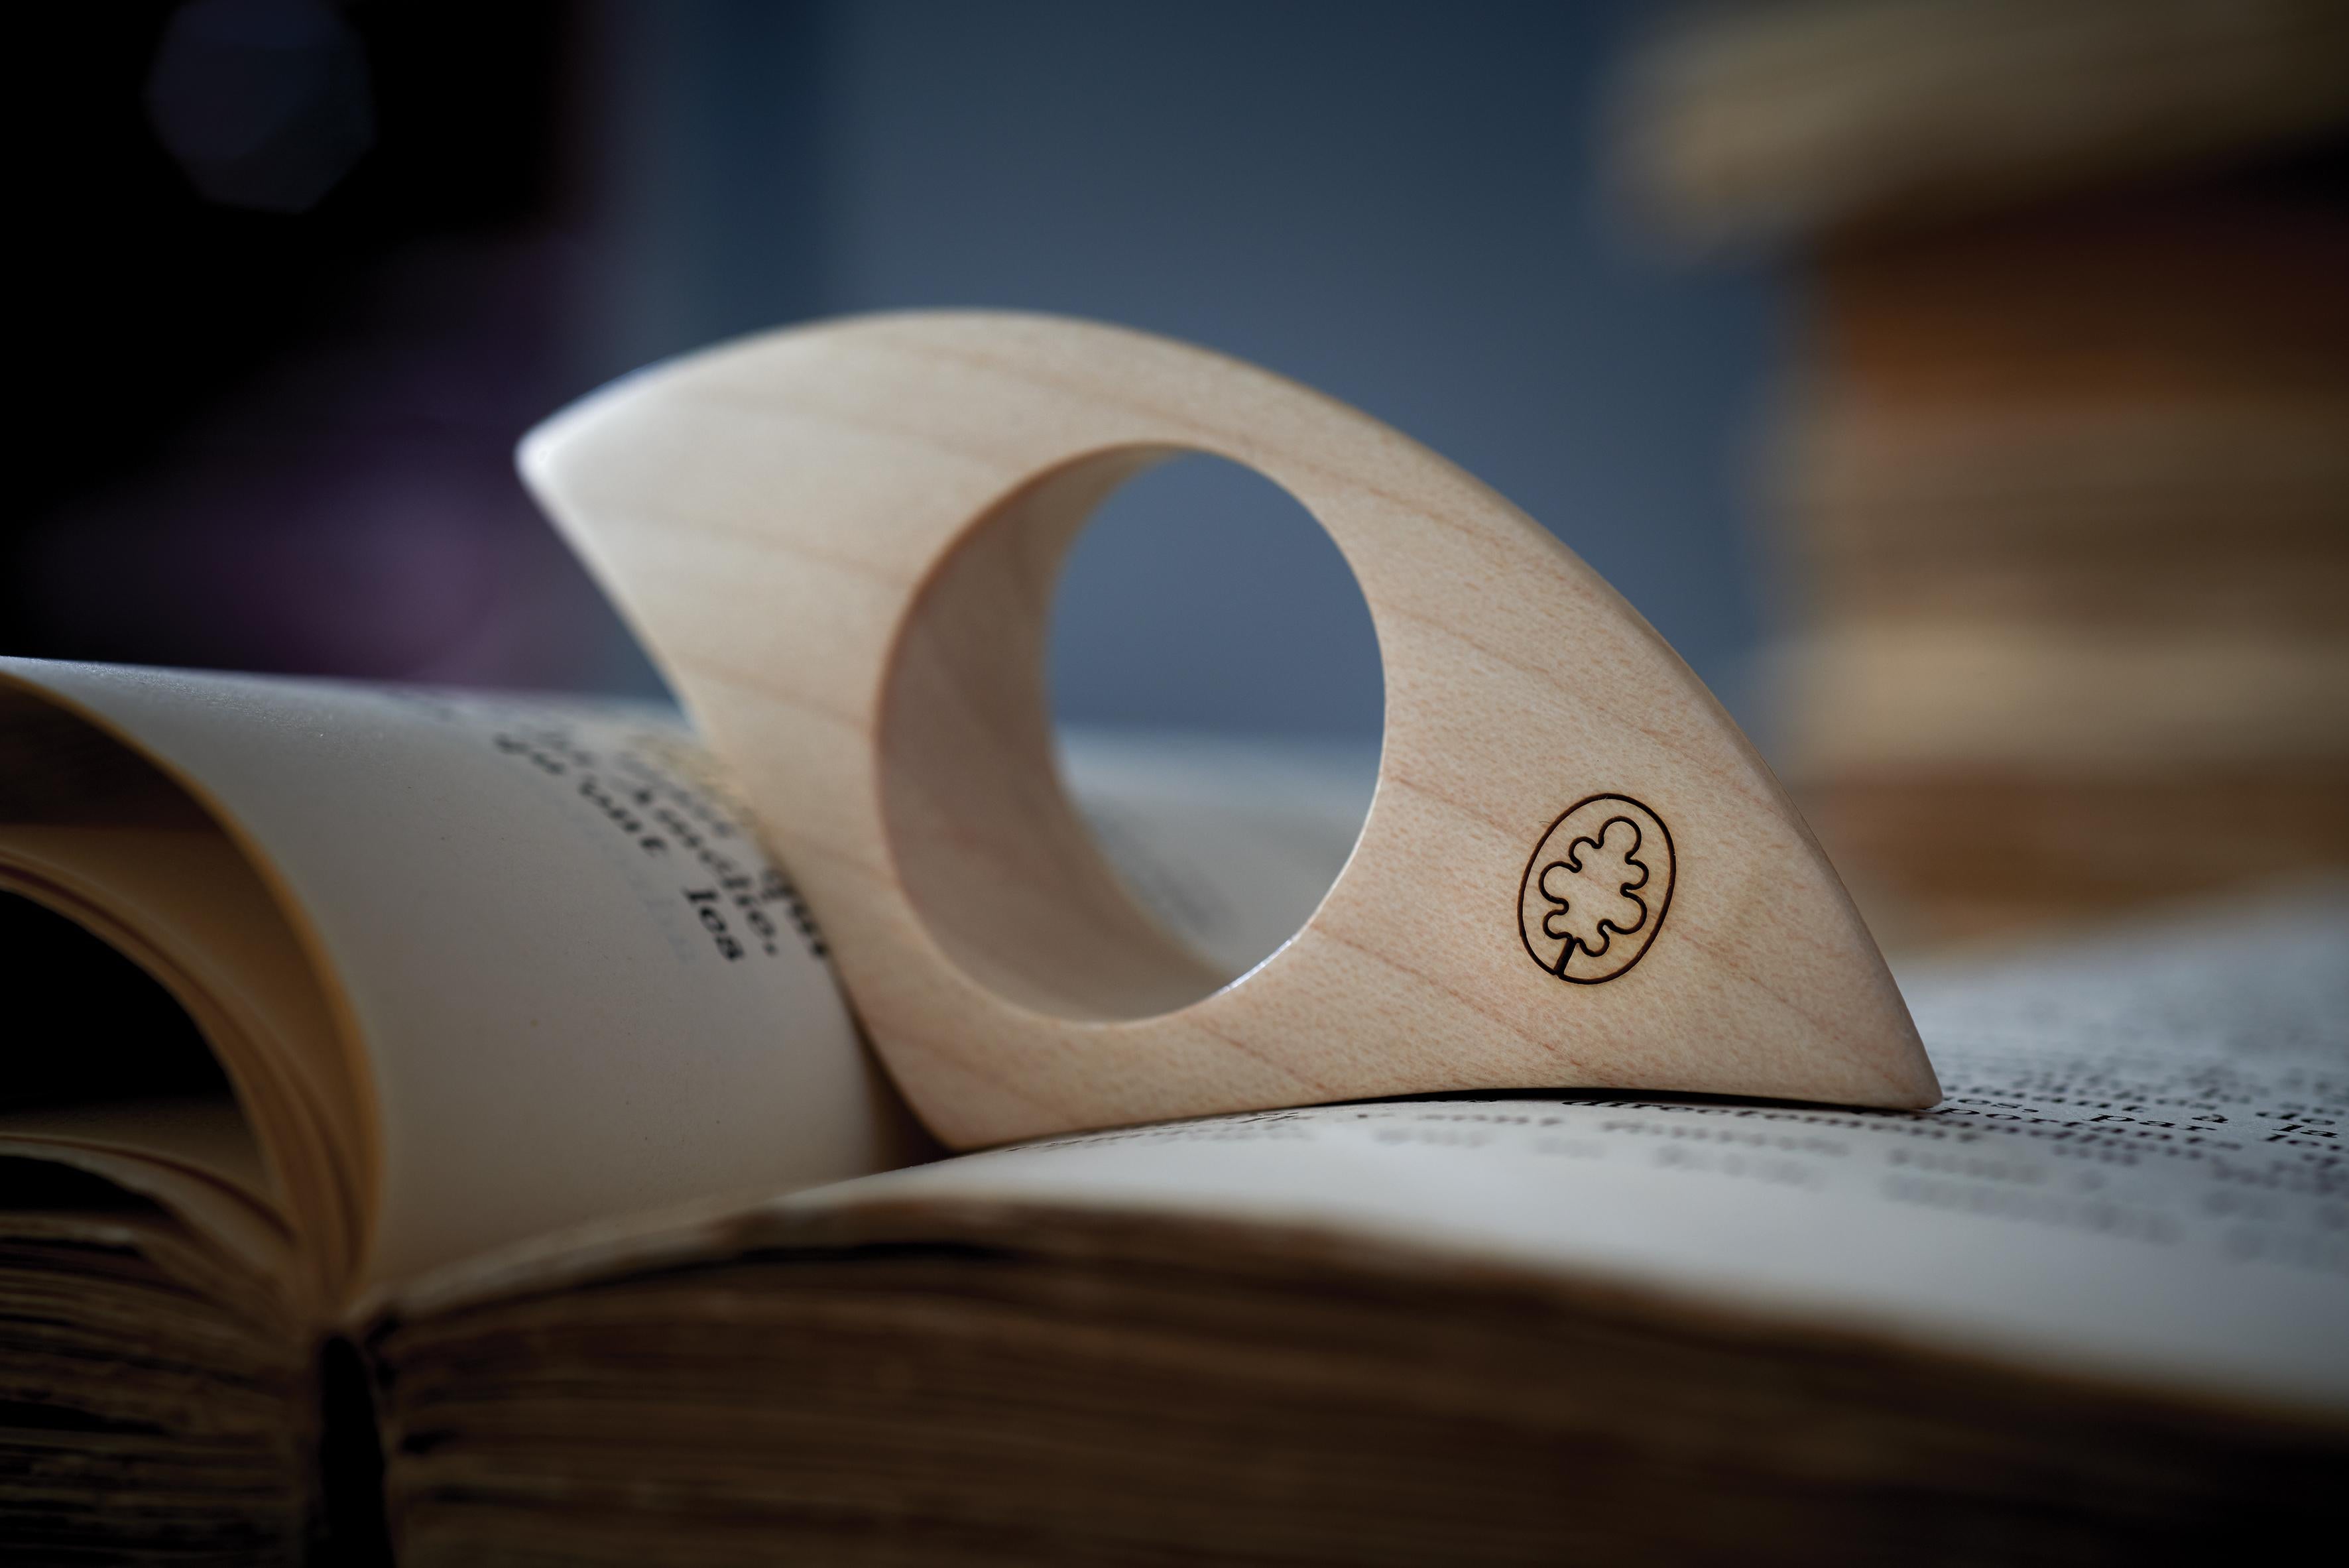 An object that celebrates a love for books and the personal nature of the relationship between the page and its reader. Combining the practical function of a bookrest and the timeless symbolism of a ring, the Fermapagina combines simplicity and an